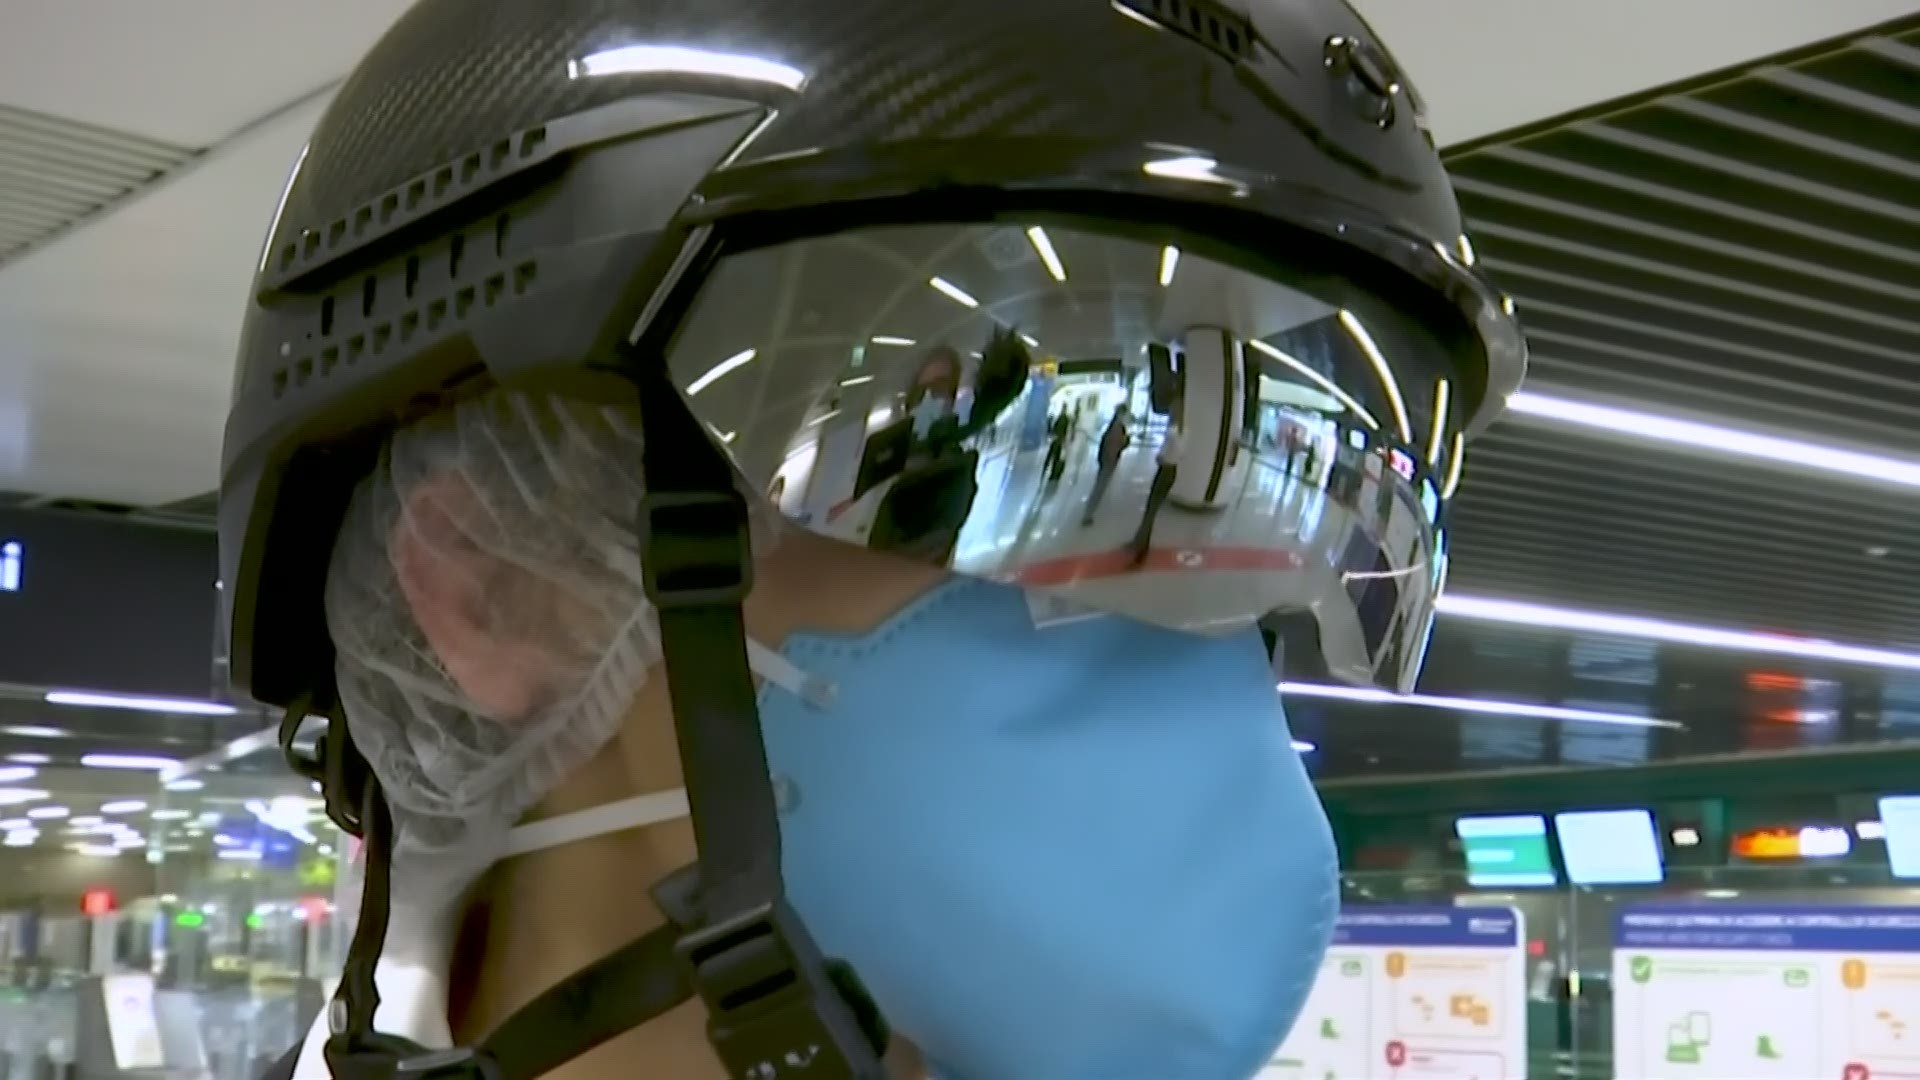 This helmet being tested at Rome's airport can scan a person's temperature from more than 20 feet away.